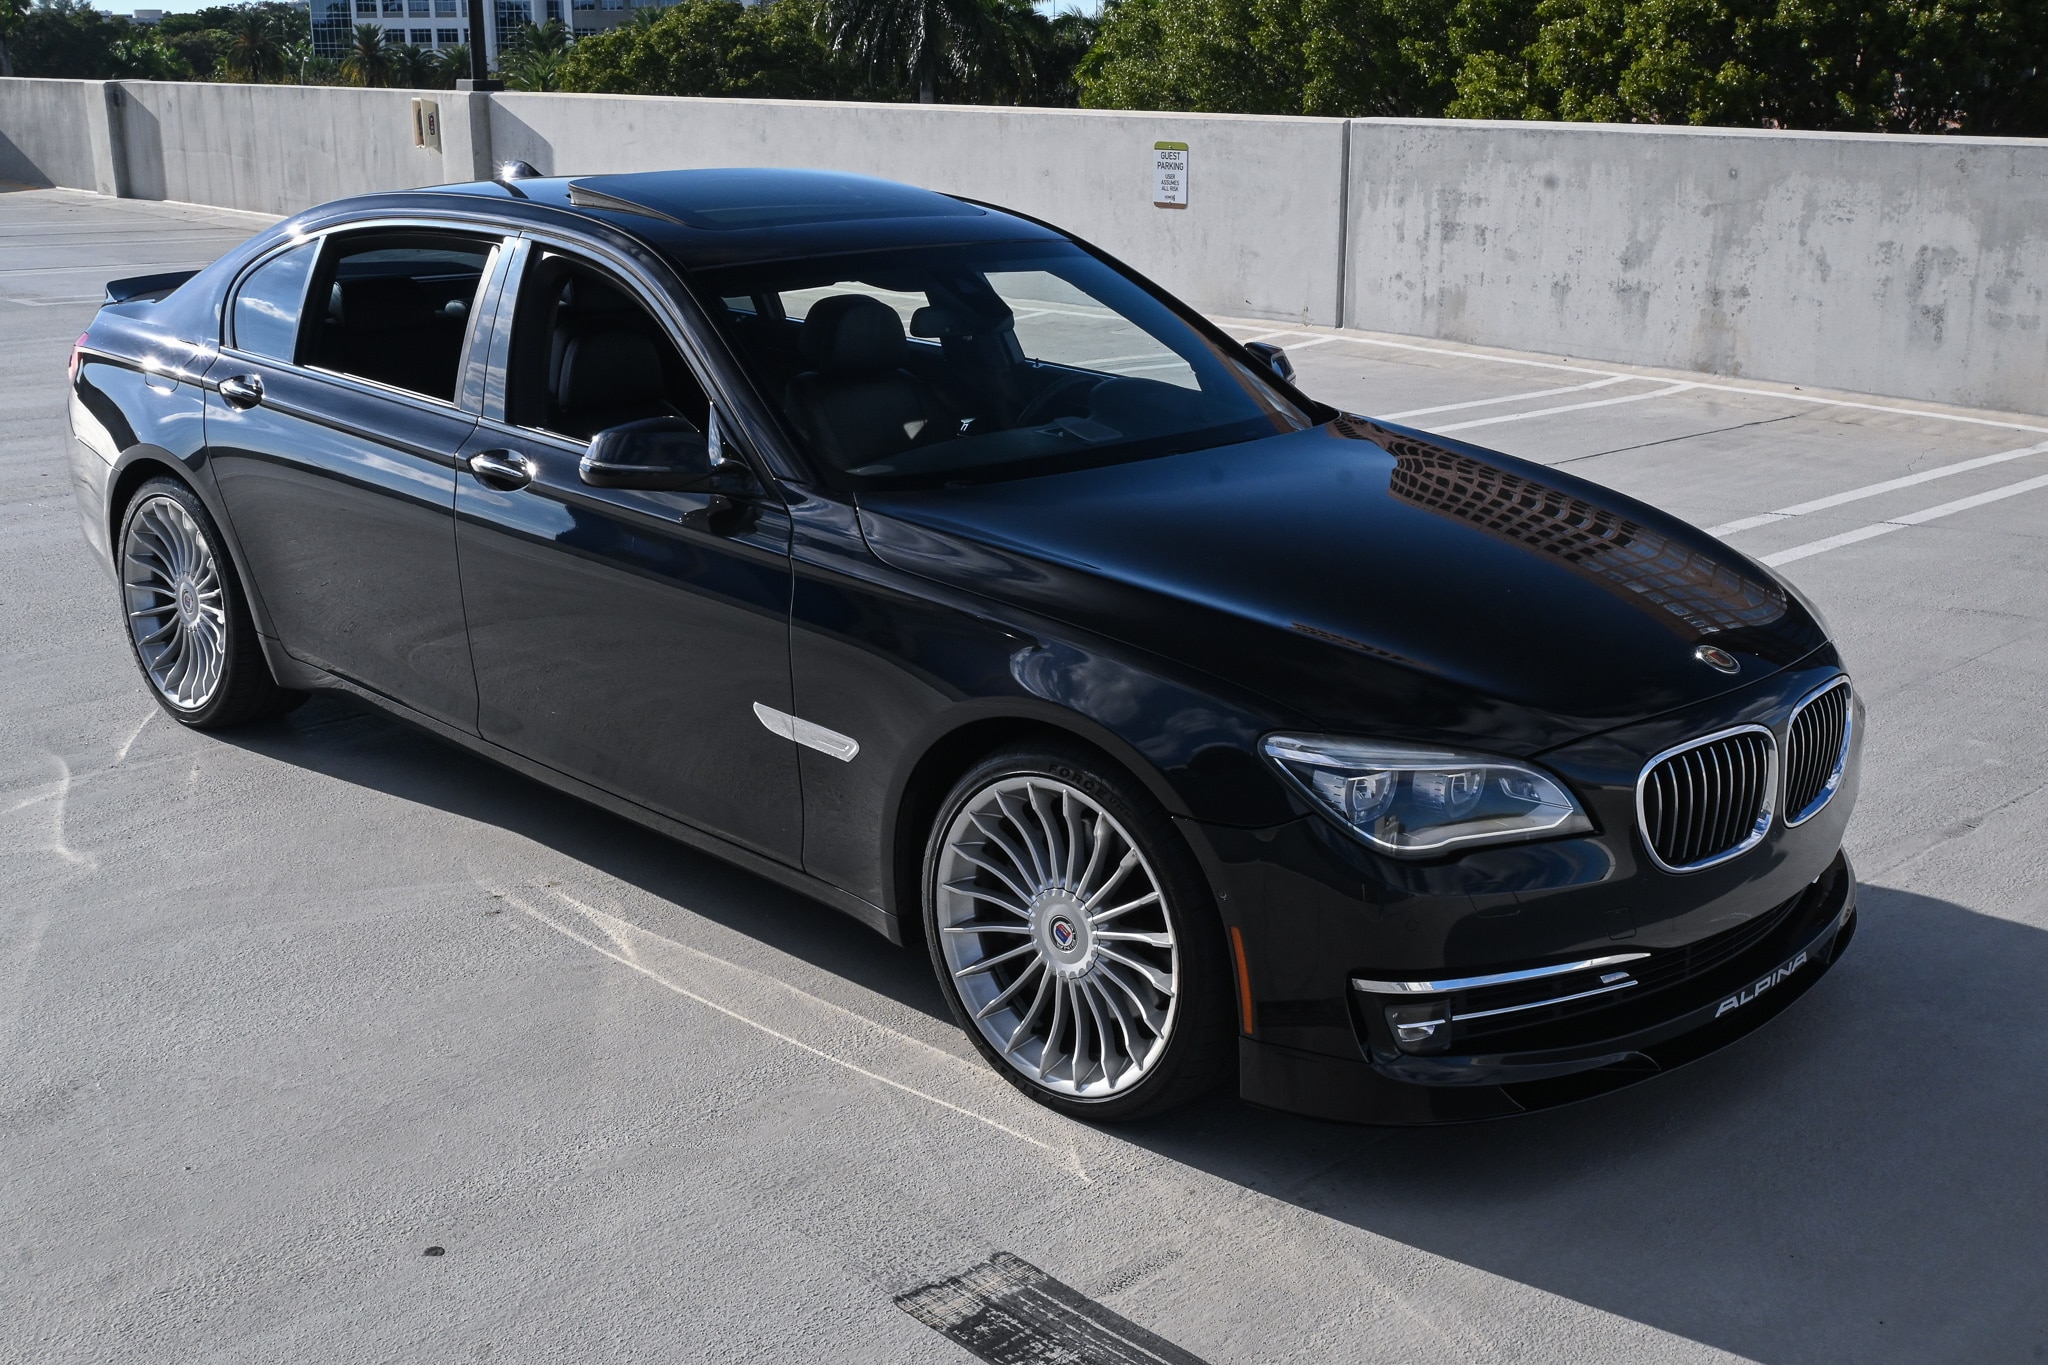 2013 Alpina B7 Rare 1 of 1740 US cars | Only 53000 miles | Unmodified | California Car | 540hp